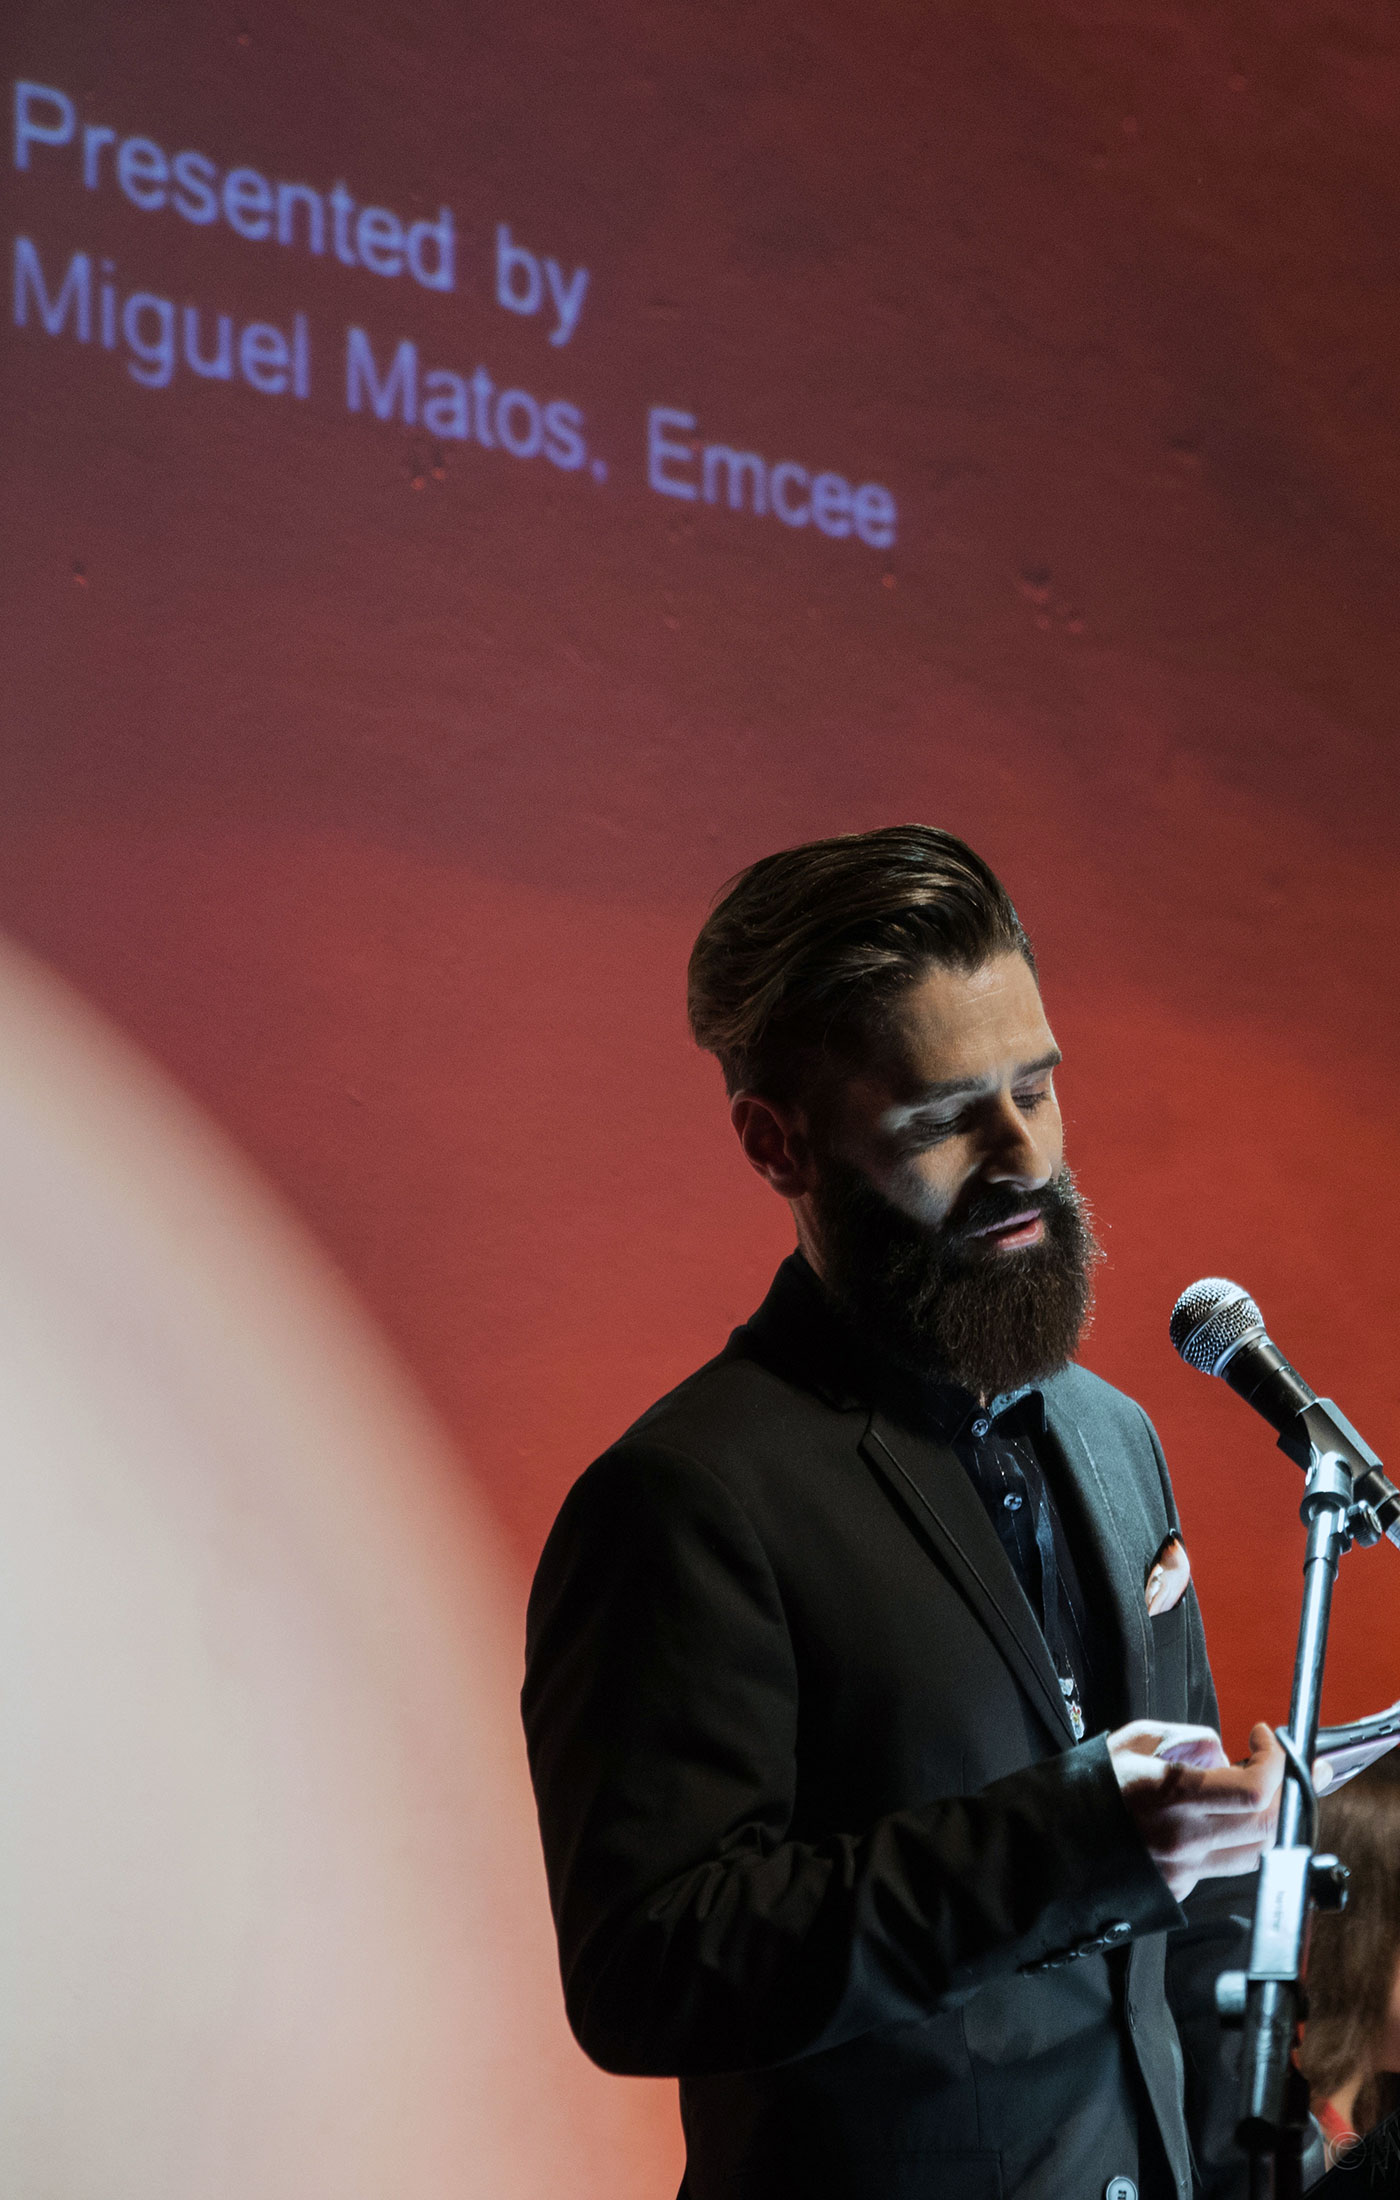 Miguel Matos at The Art and Olfaction Awards, Photo by Marina Chichi